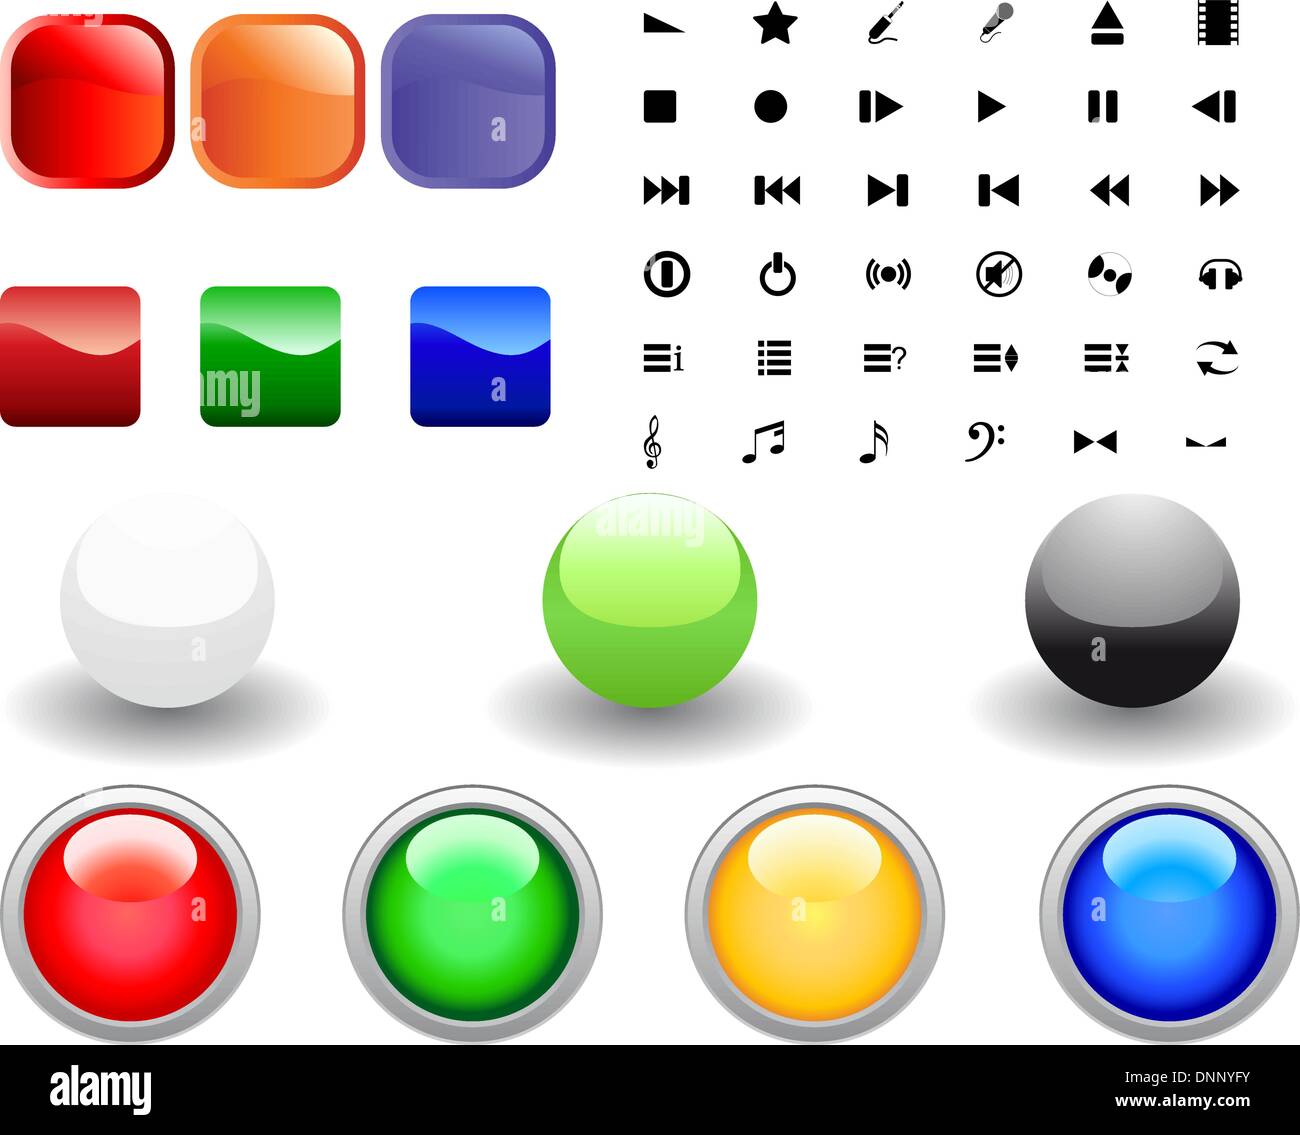 Collection of different icons for using in web design Stock Vector